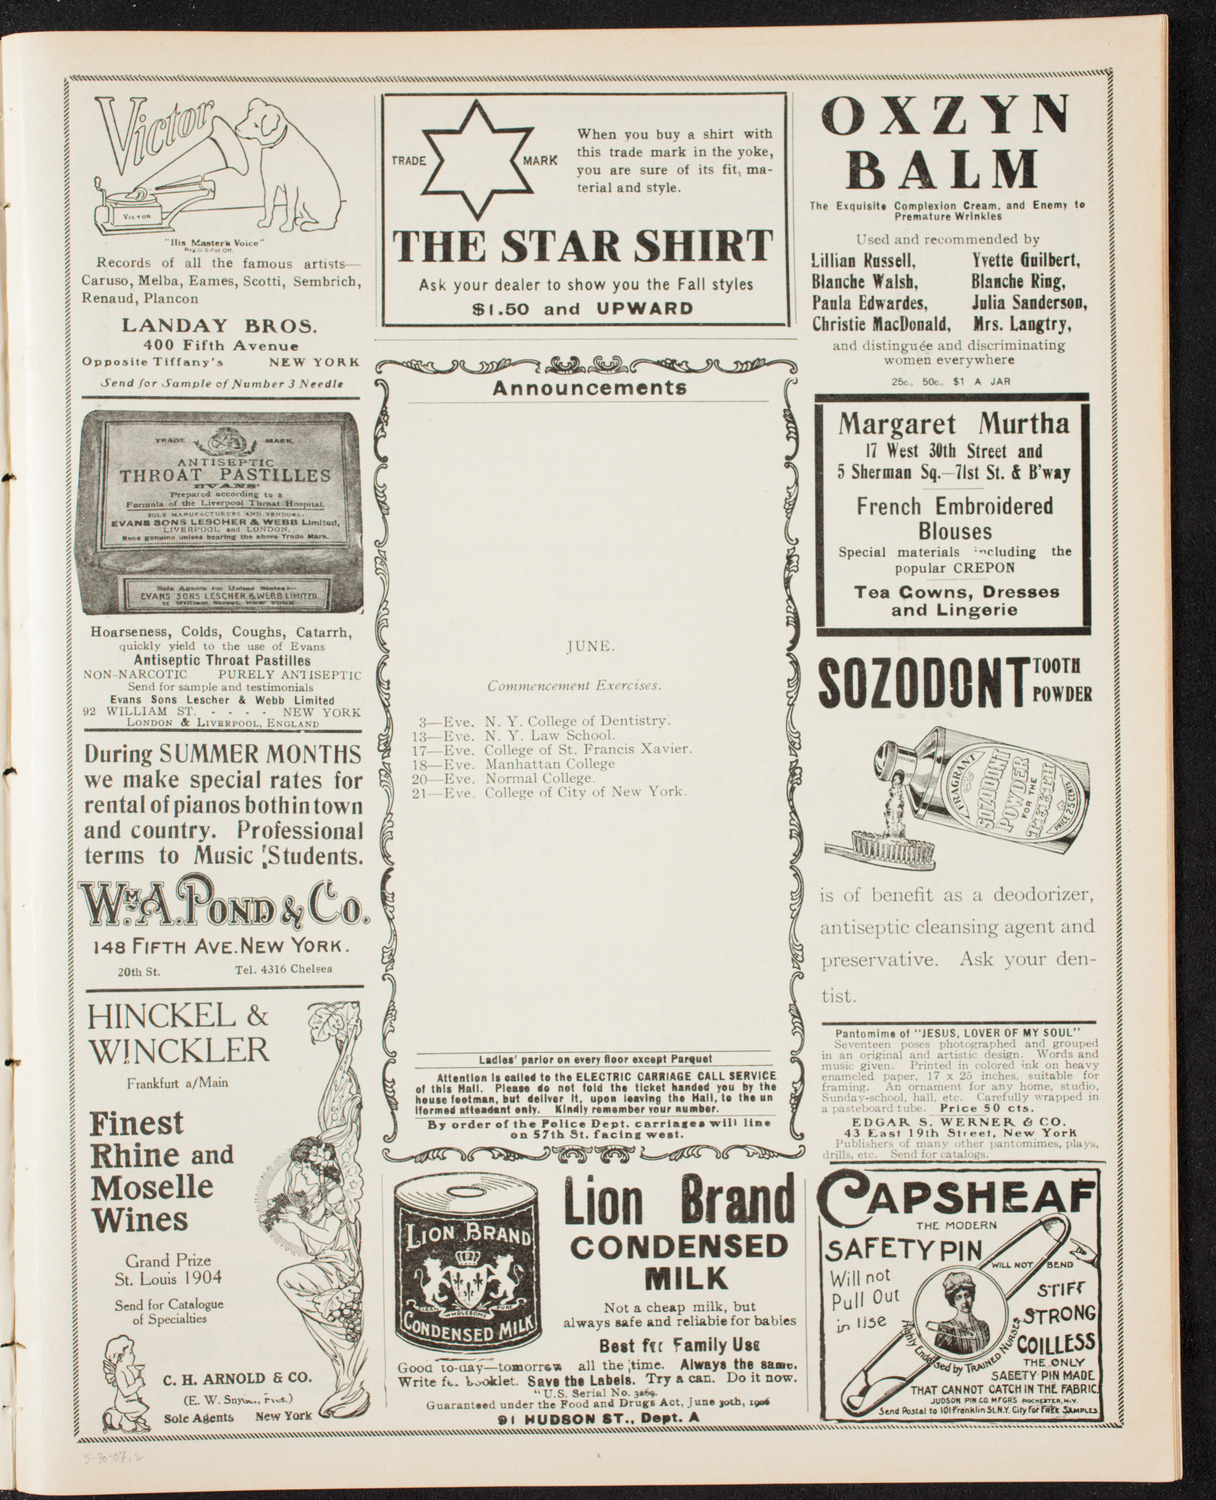 Grand Army of the Republic Memorial Day Exercises, May 30, 1907, program page 3